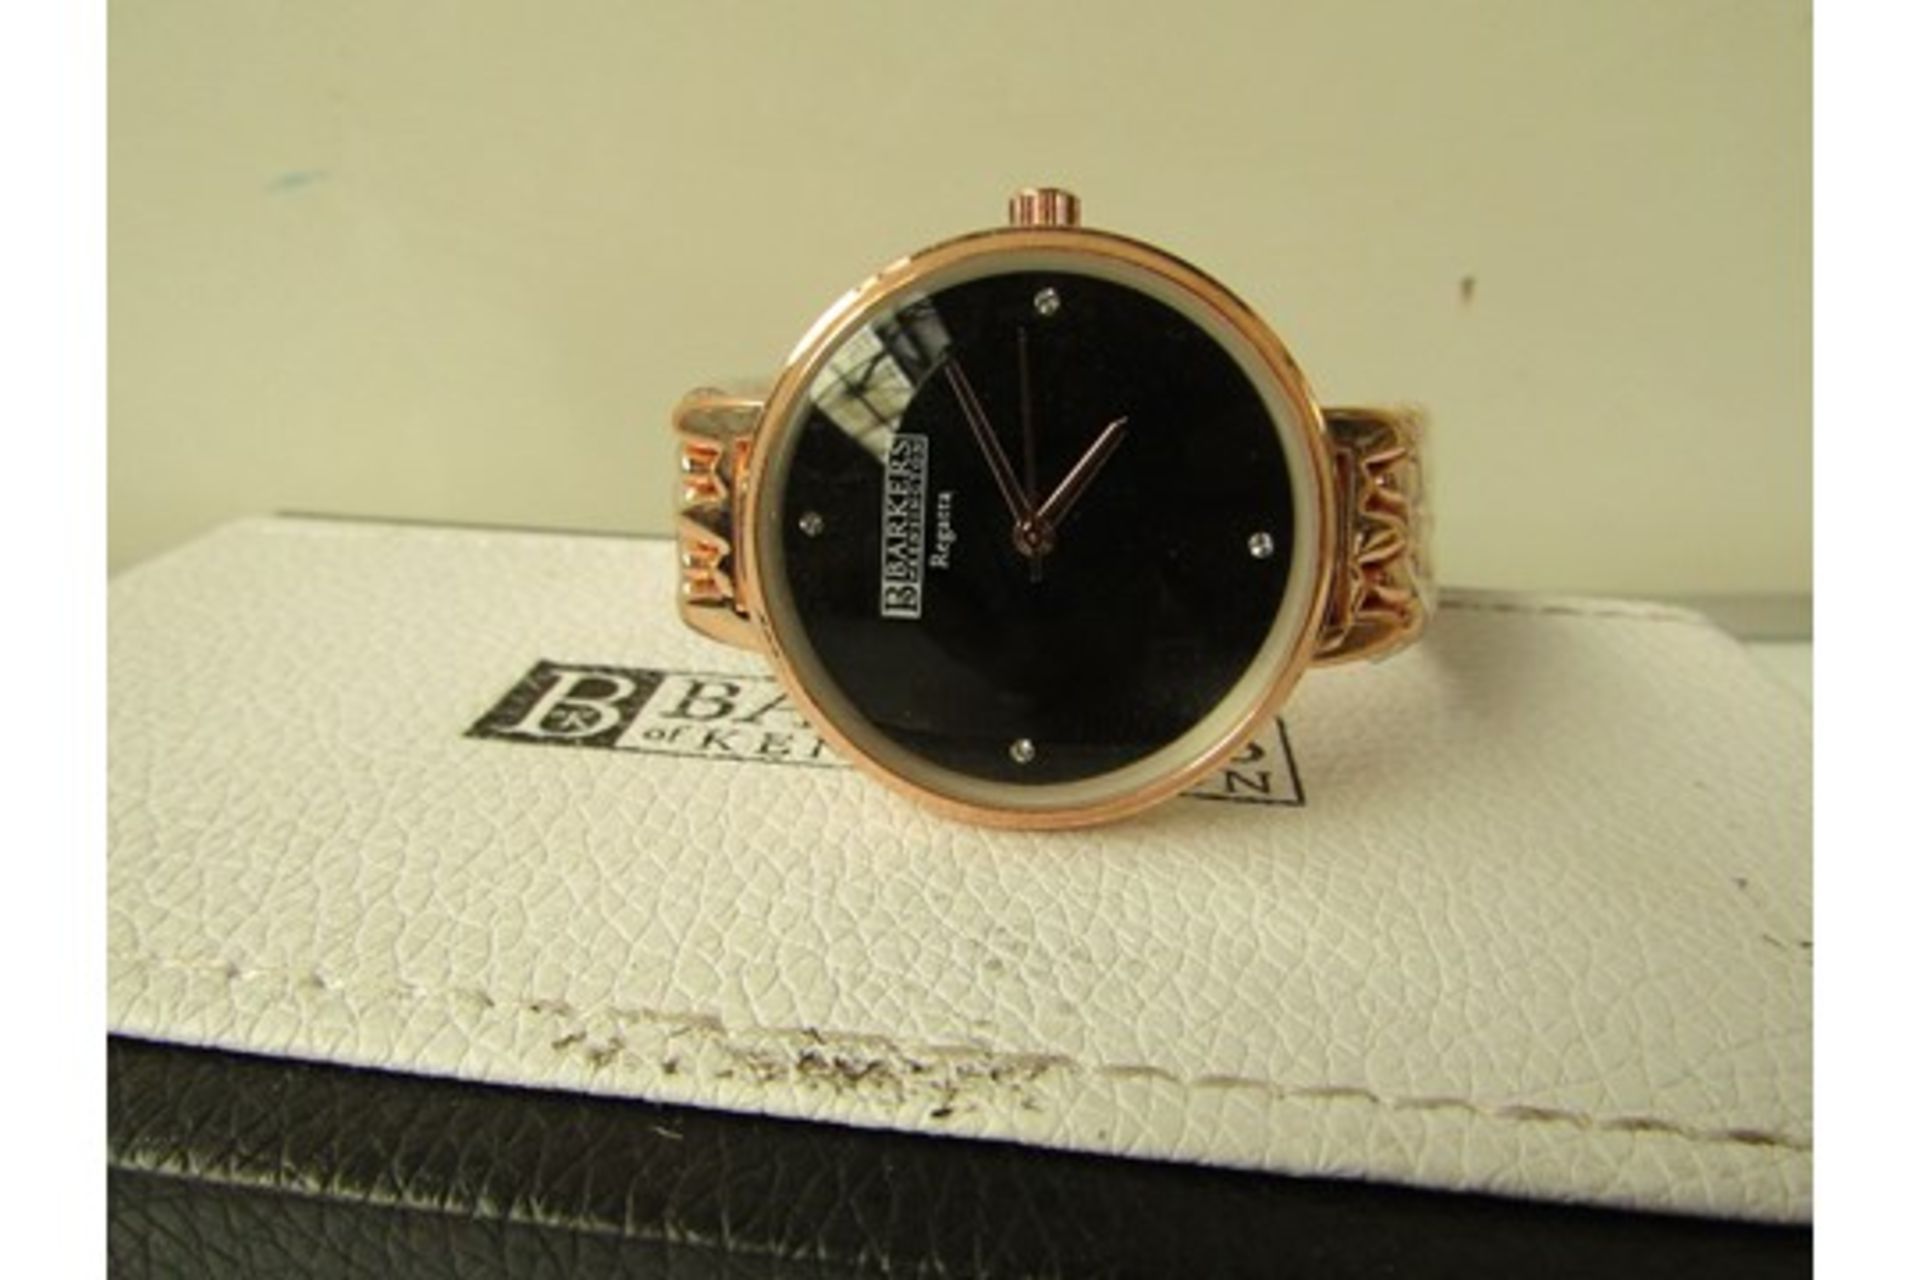 Barkers of Kensington Regatta Blac SRP GBP315  Condition: Brand new with box, tags and 5-yr